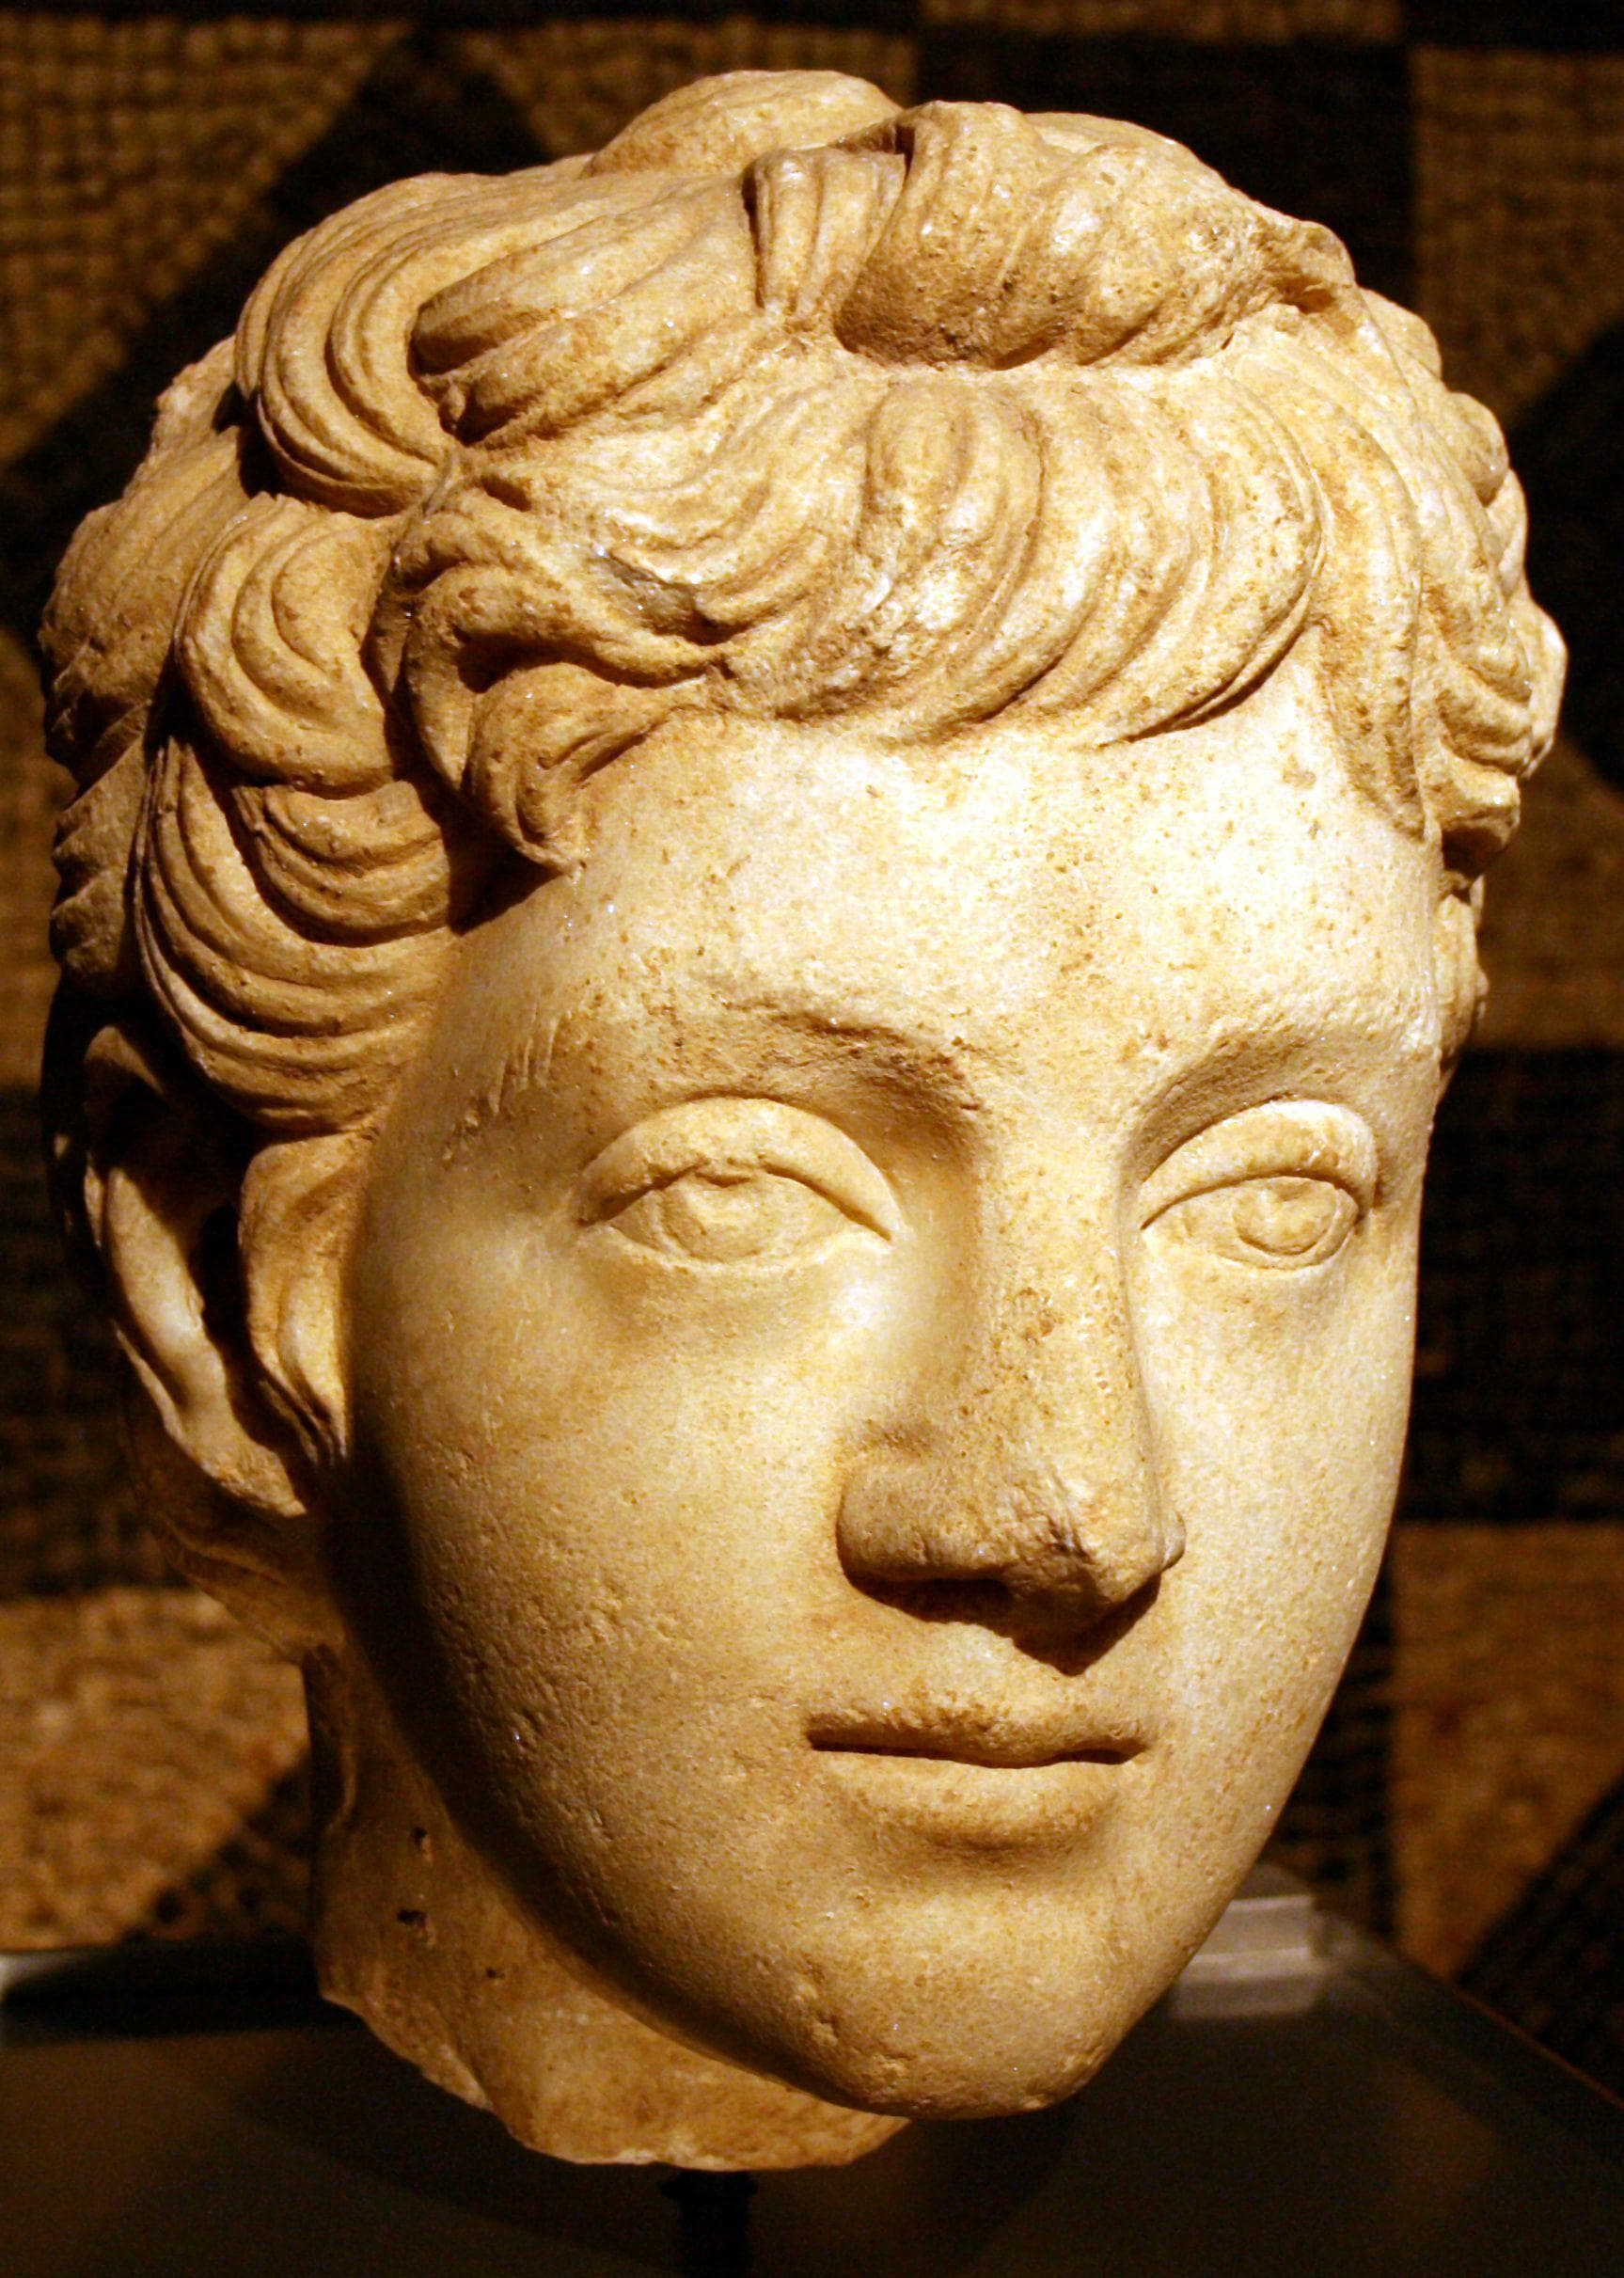 Image of Random Real Commodus Was An Even More Over-The-Top Emperor Than Gladiator's Version